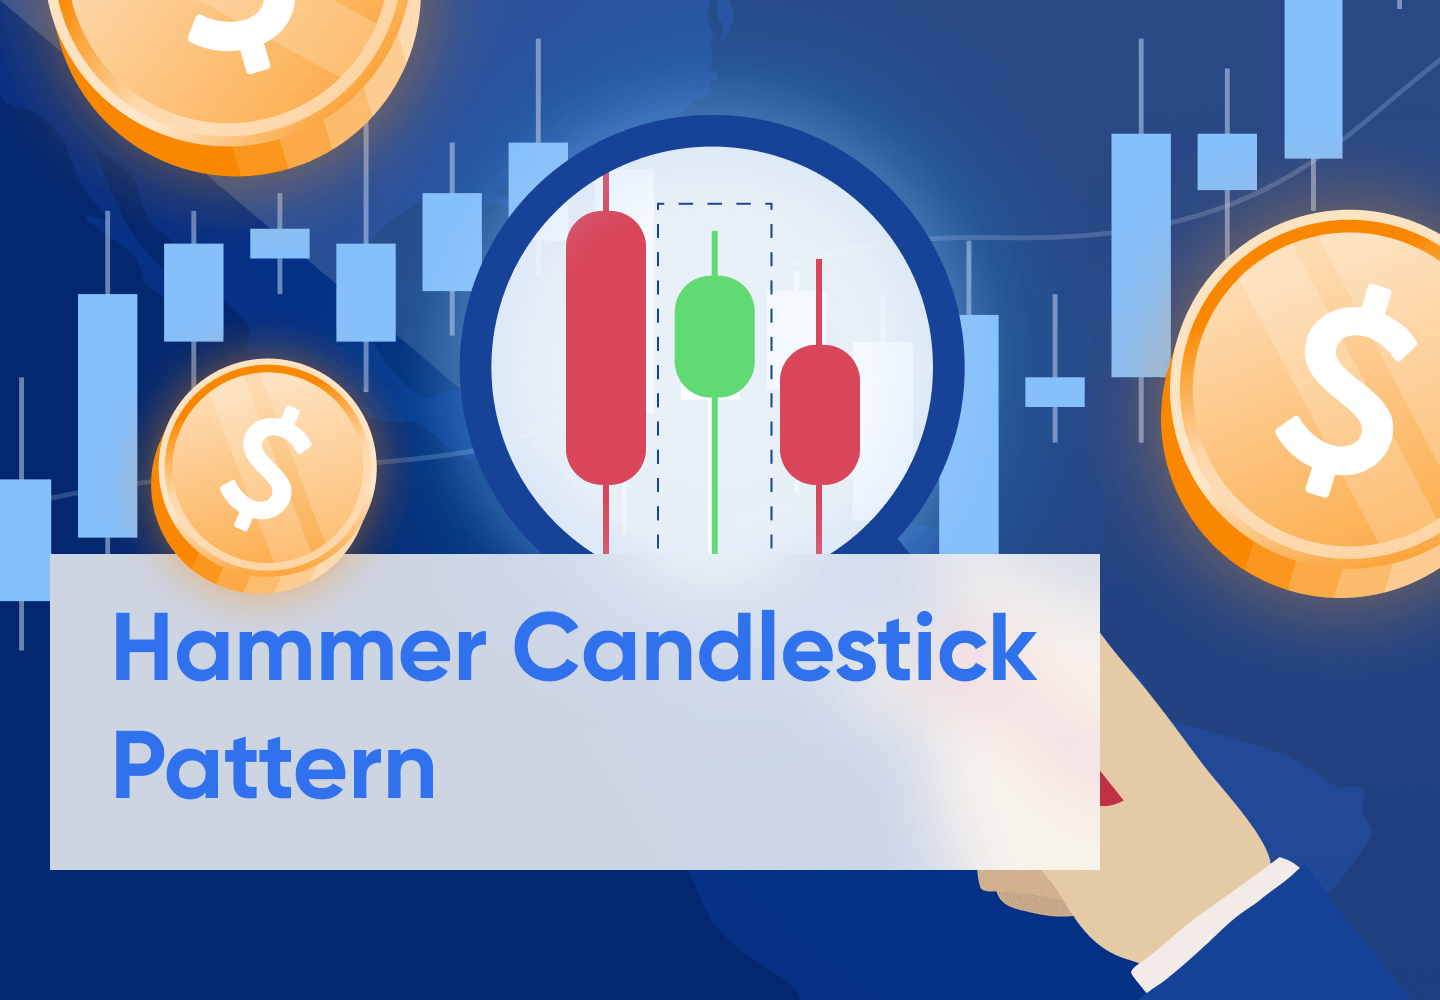 What Is A Hammer Candlestick Pattern?